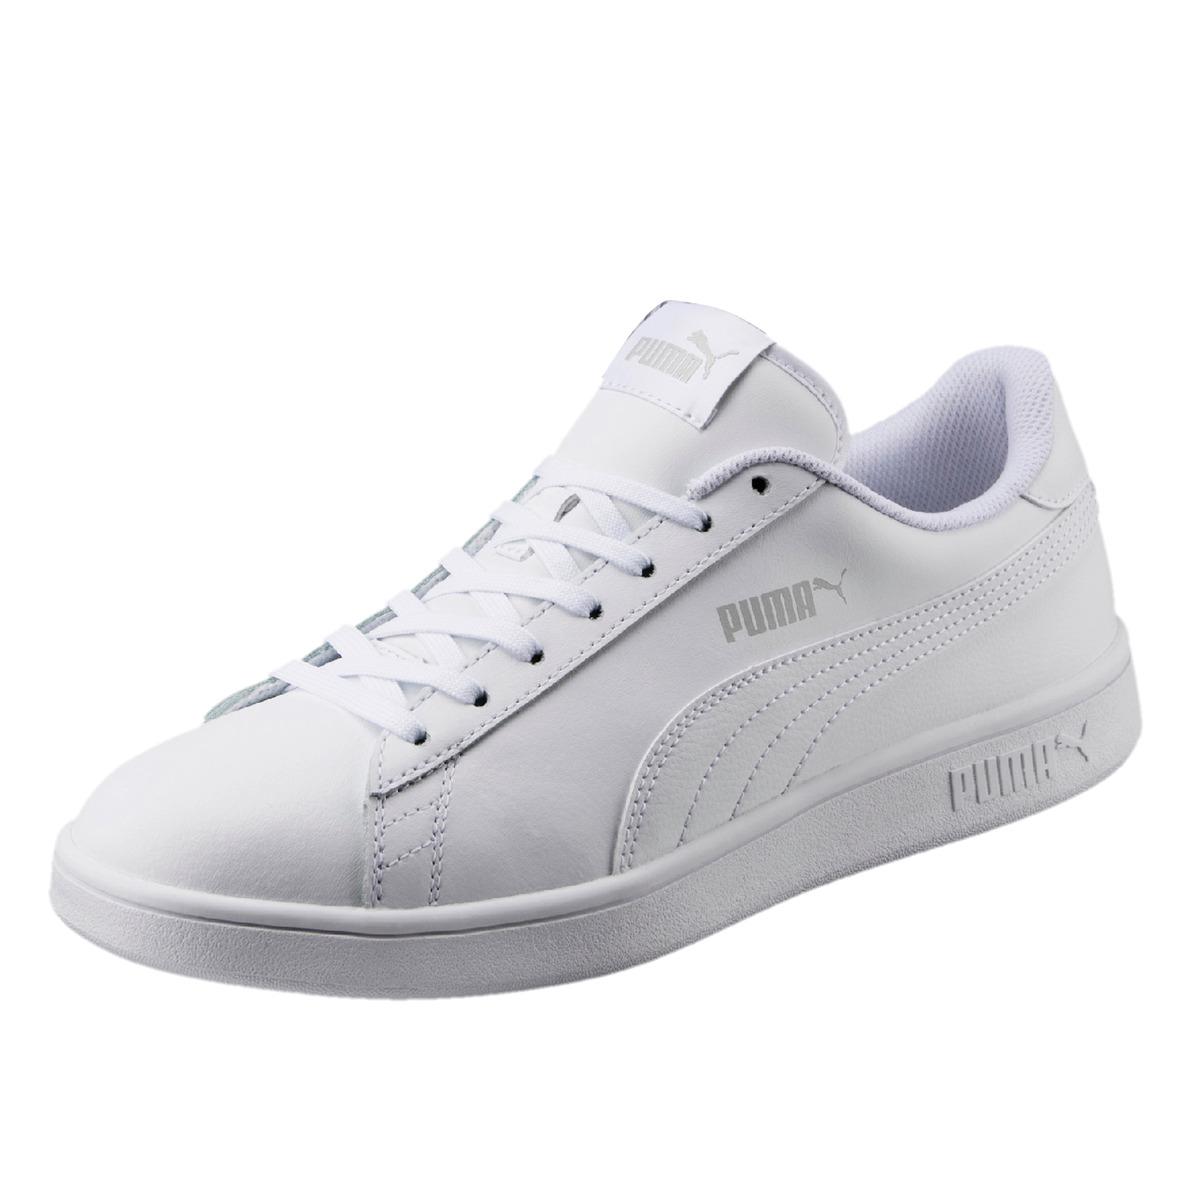 PUMA Leather Smash V2 L Casual Trainers in White for Men - Lyst